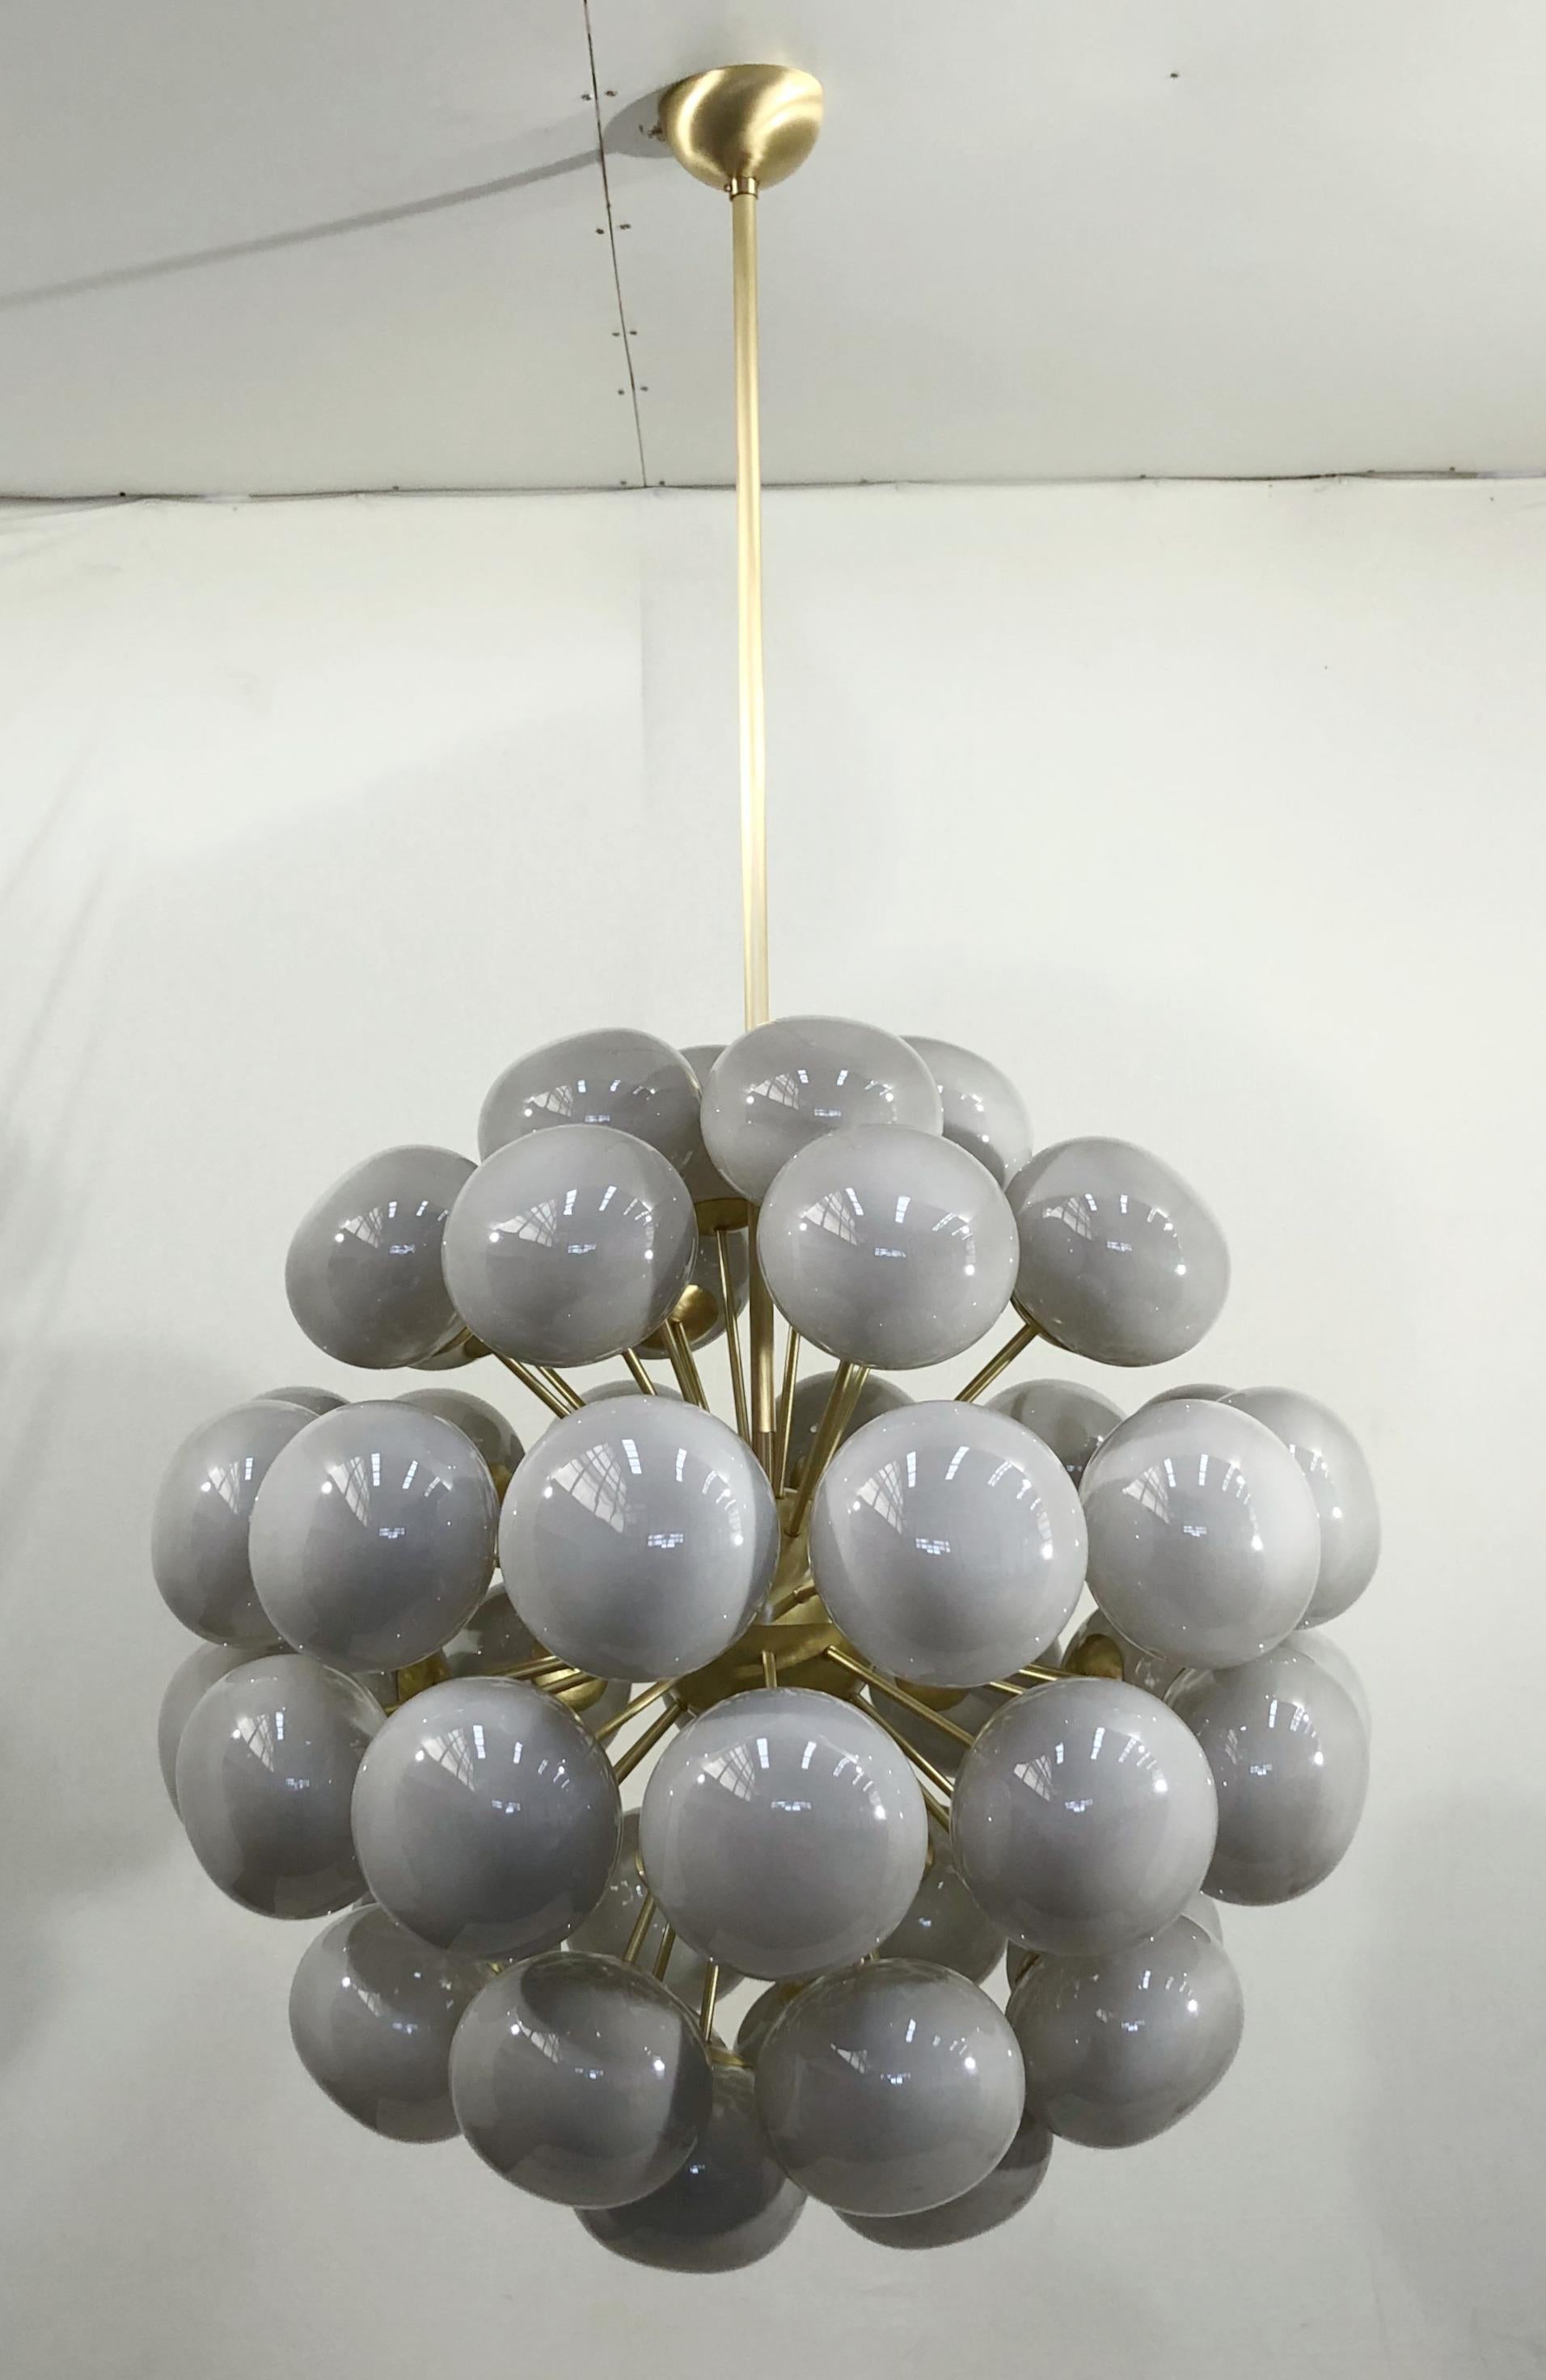 Italian sputnik chandelier with 48 gray Murano pebble glass shades mounted on brass frame / Designed by Fabio Bergomi for Fabio Ltd / Made in Italy
48 lights / E12 or E14 type / max 40W each
Measures: diameter 38 inches / height 38 inches plus rod